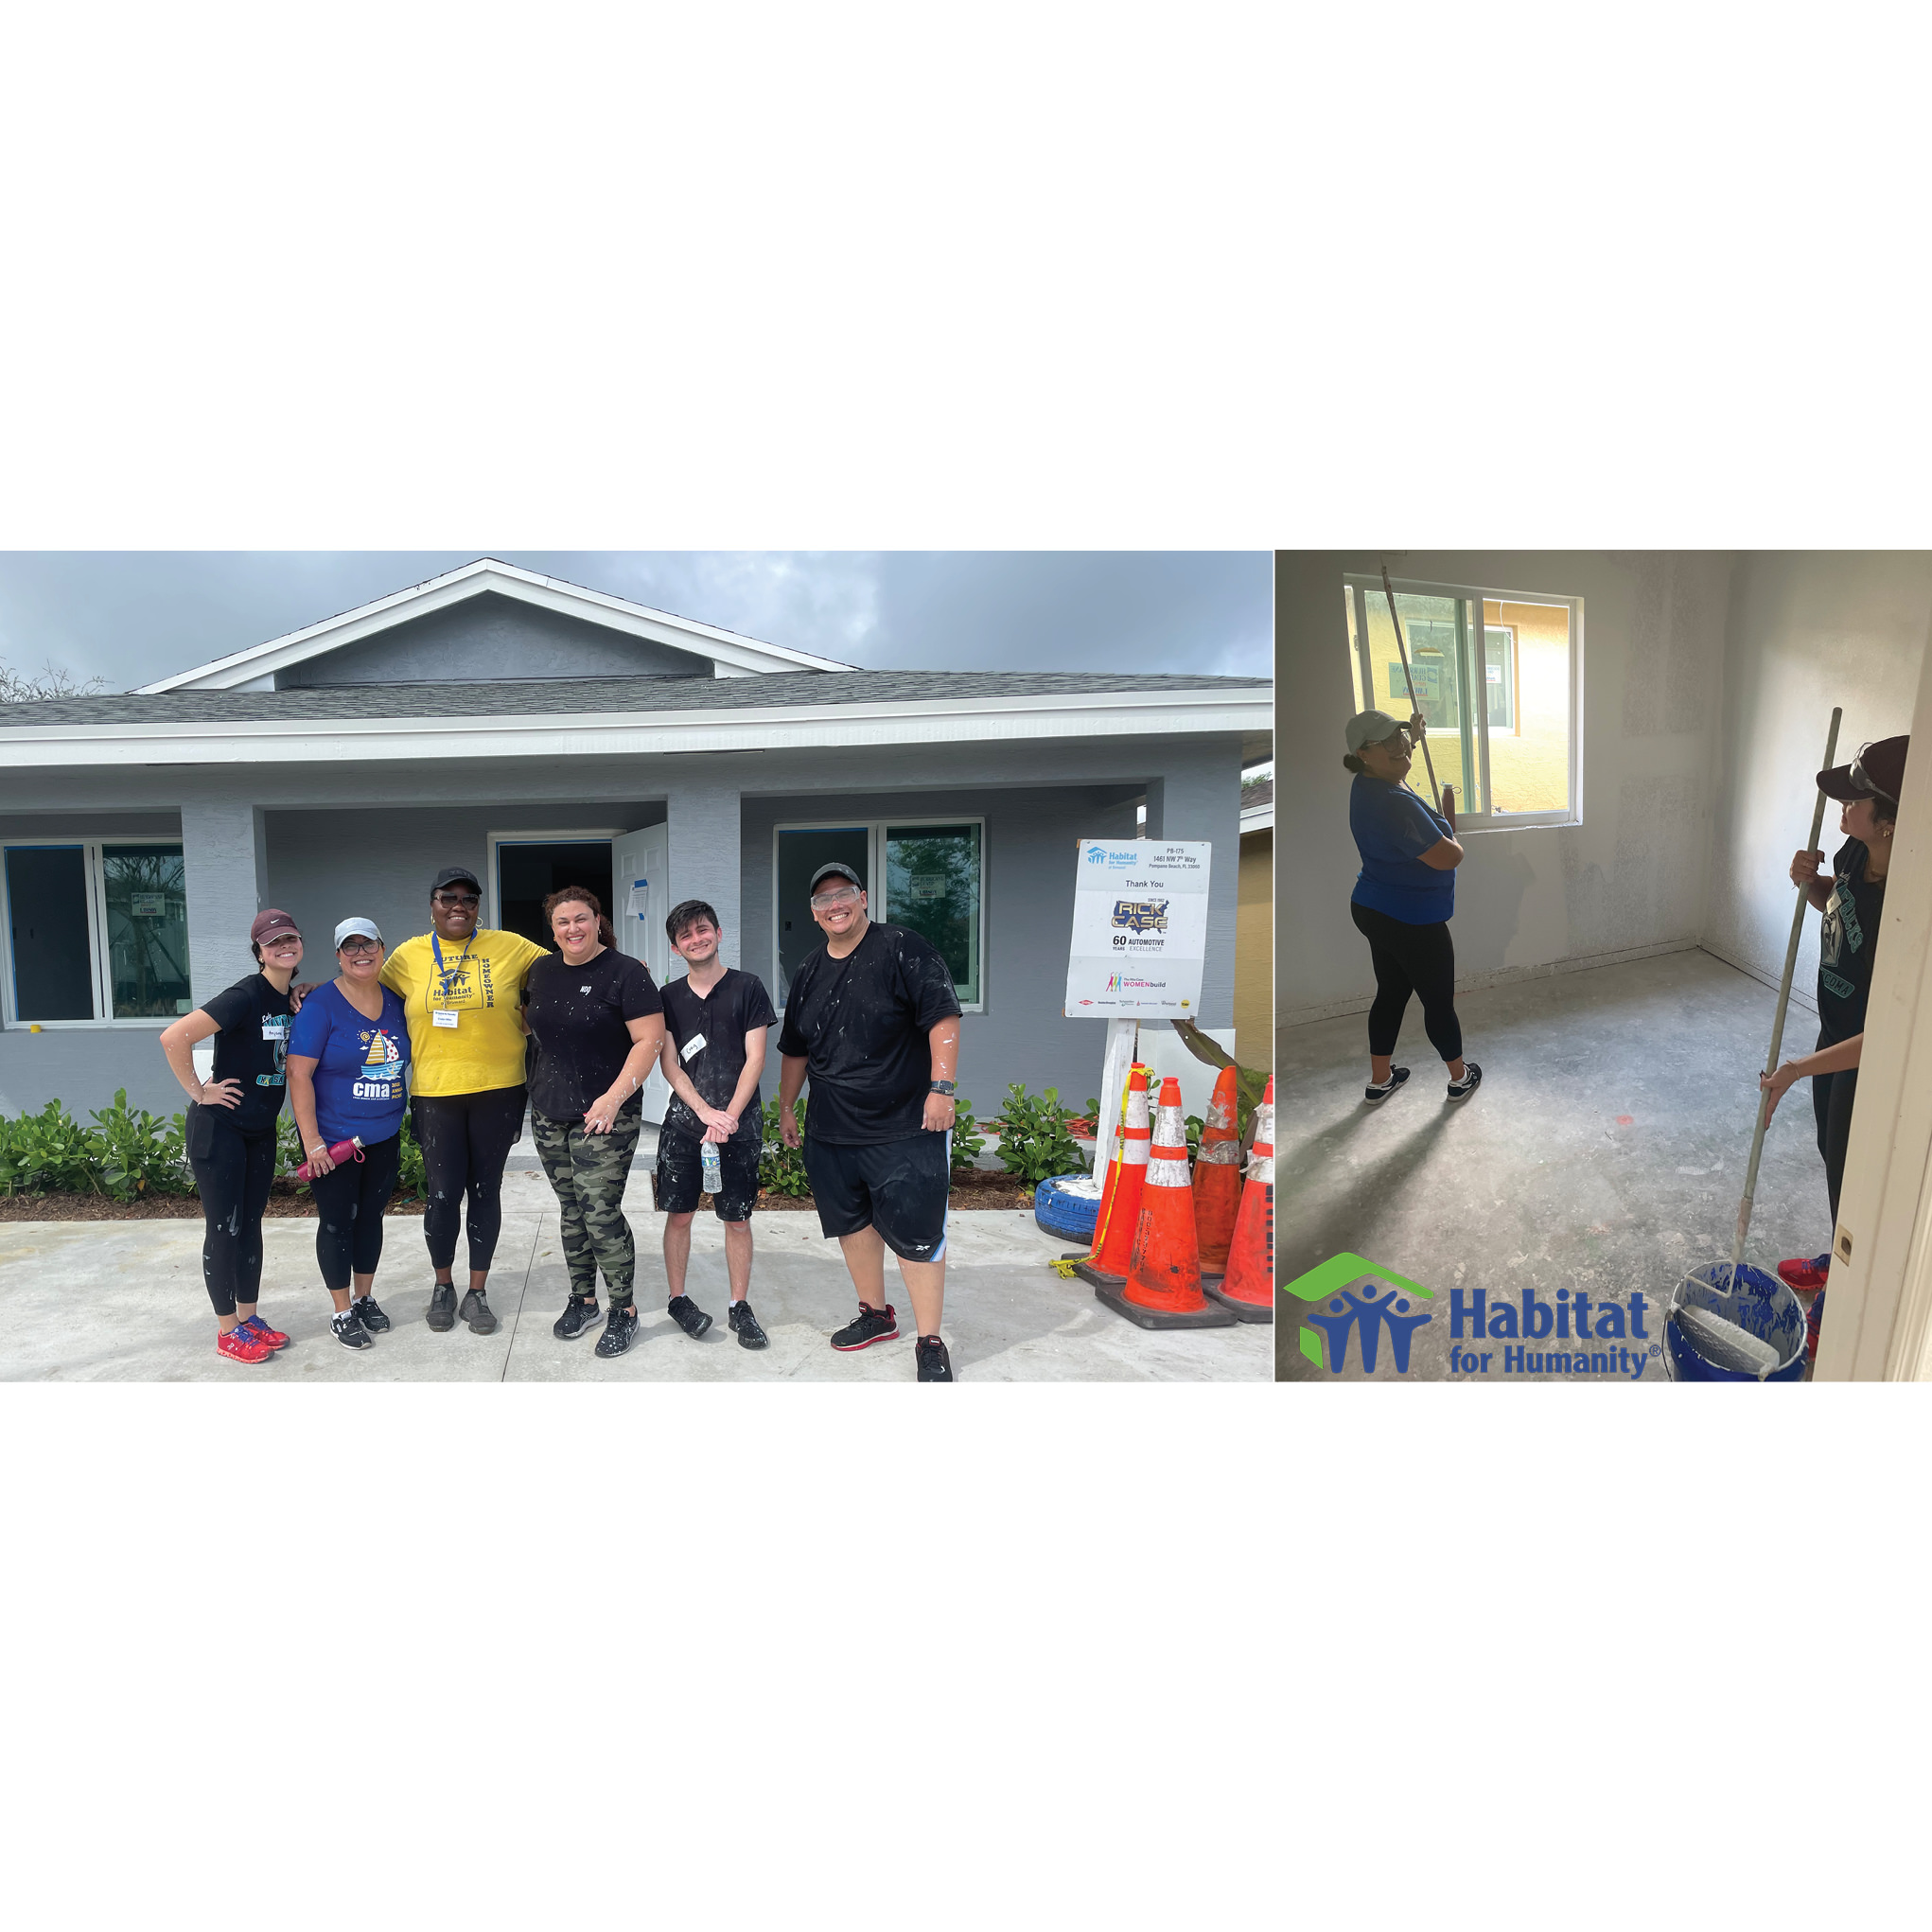 CMA Staff Volunteer for Habitat for Humanity Project